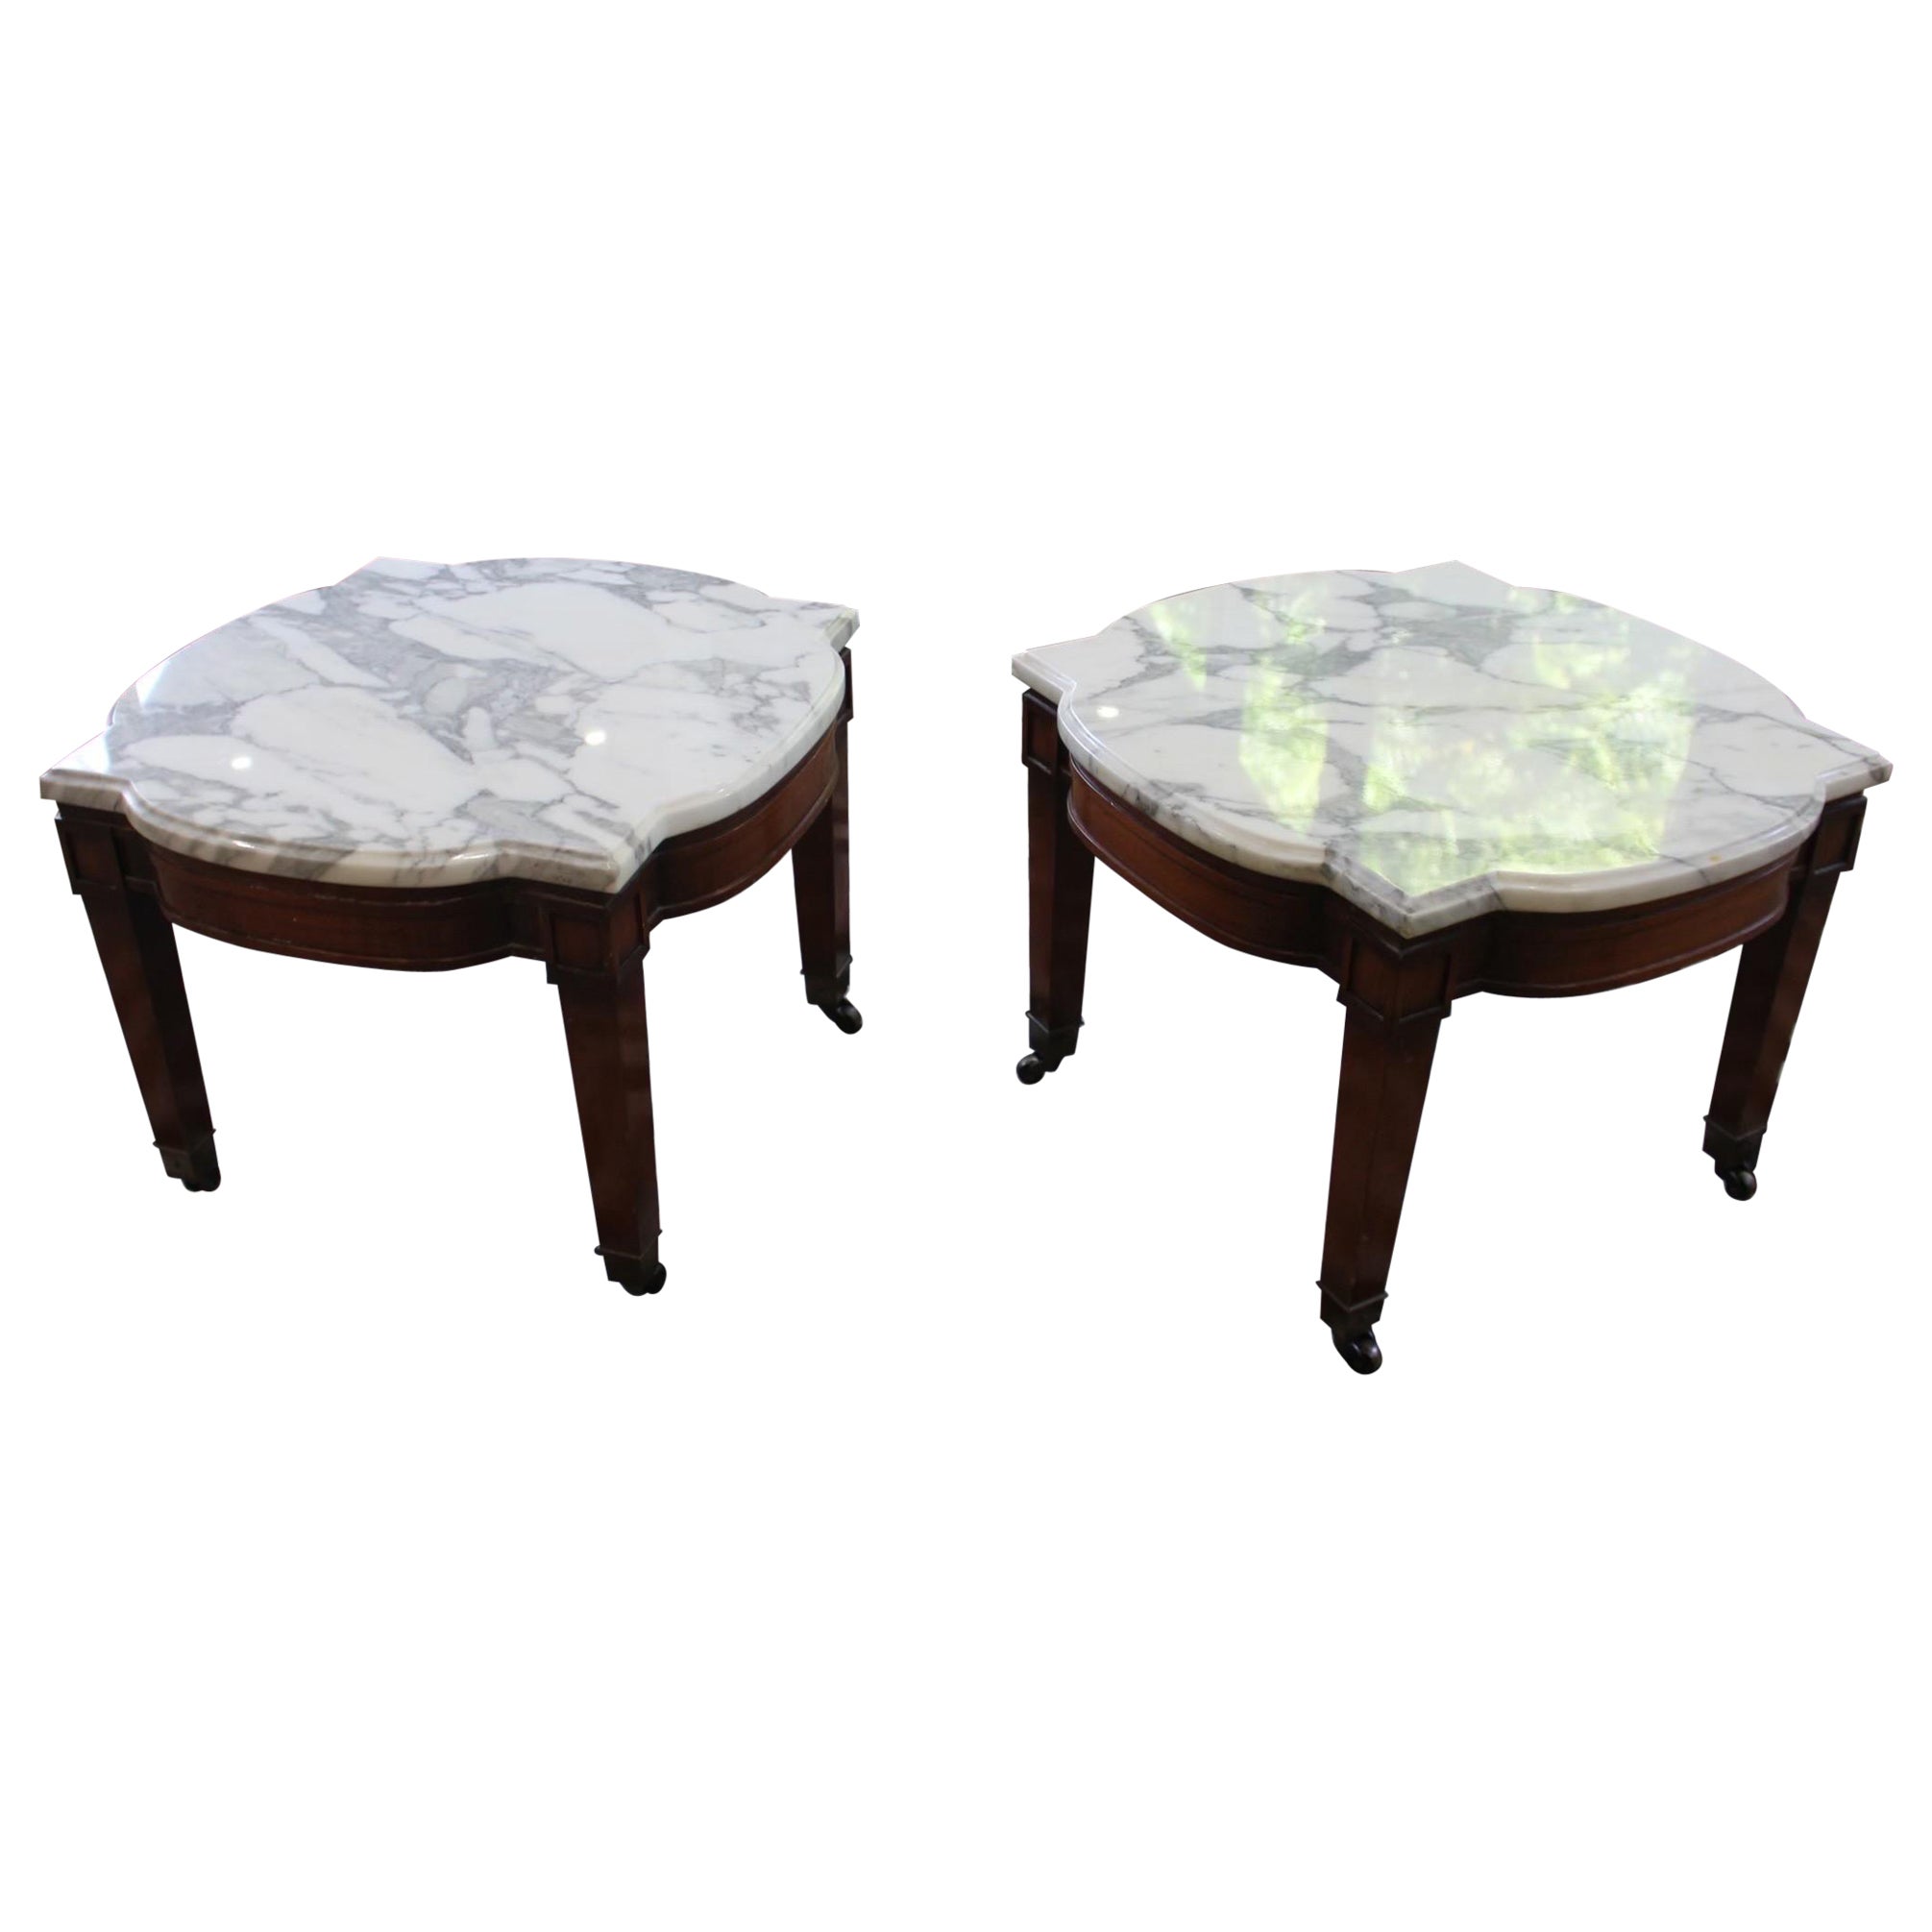 1950’s Regency French Mahogany Marble Side Tables - Set of 2 For Sale